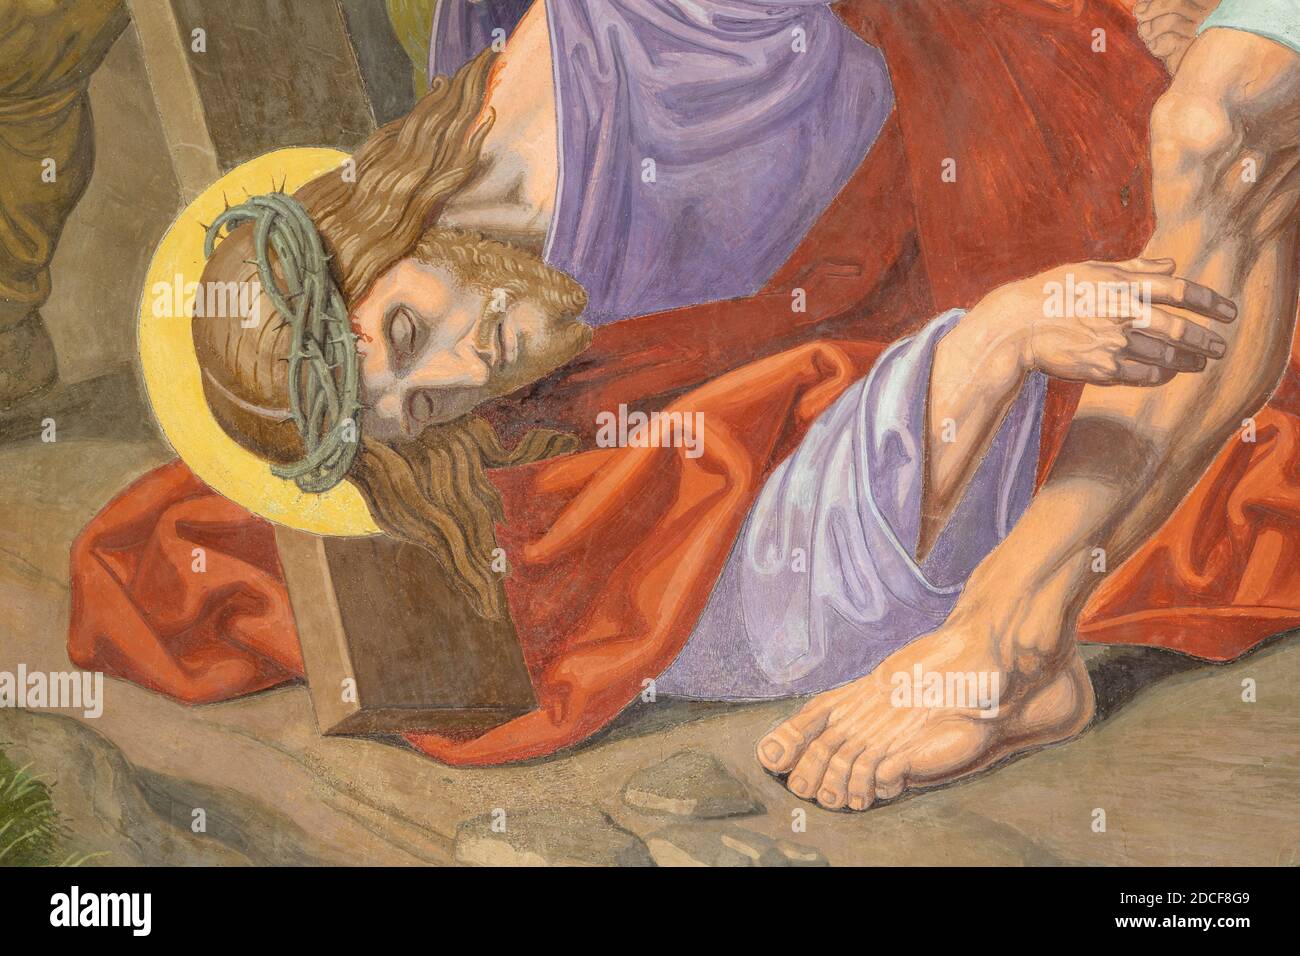 VIENNA, AUSTIRA - OCTOBER 22, 2020: The detail of fresco Fall of Jesus undwer the cross  as part of Cross way station. Stock Photo